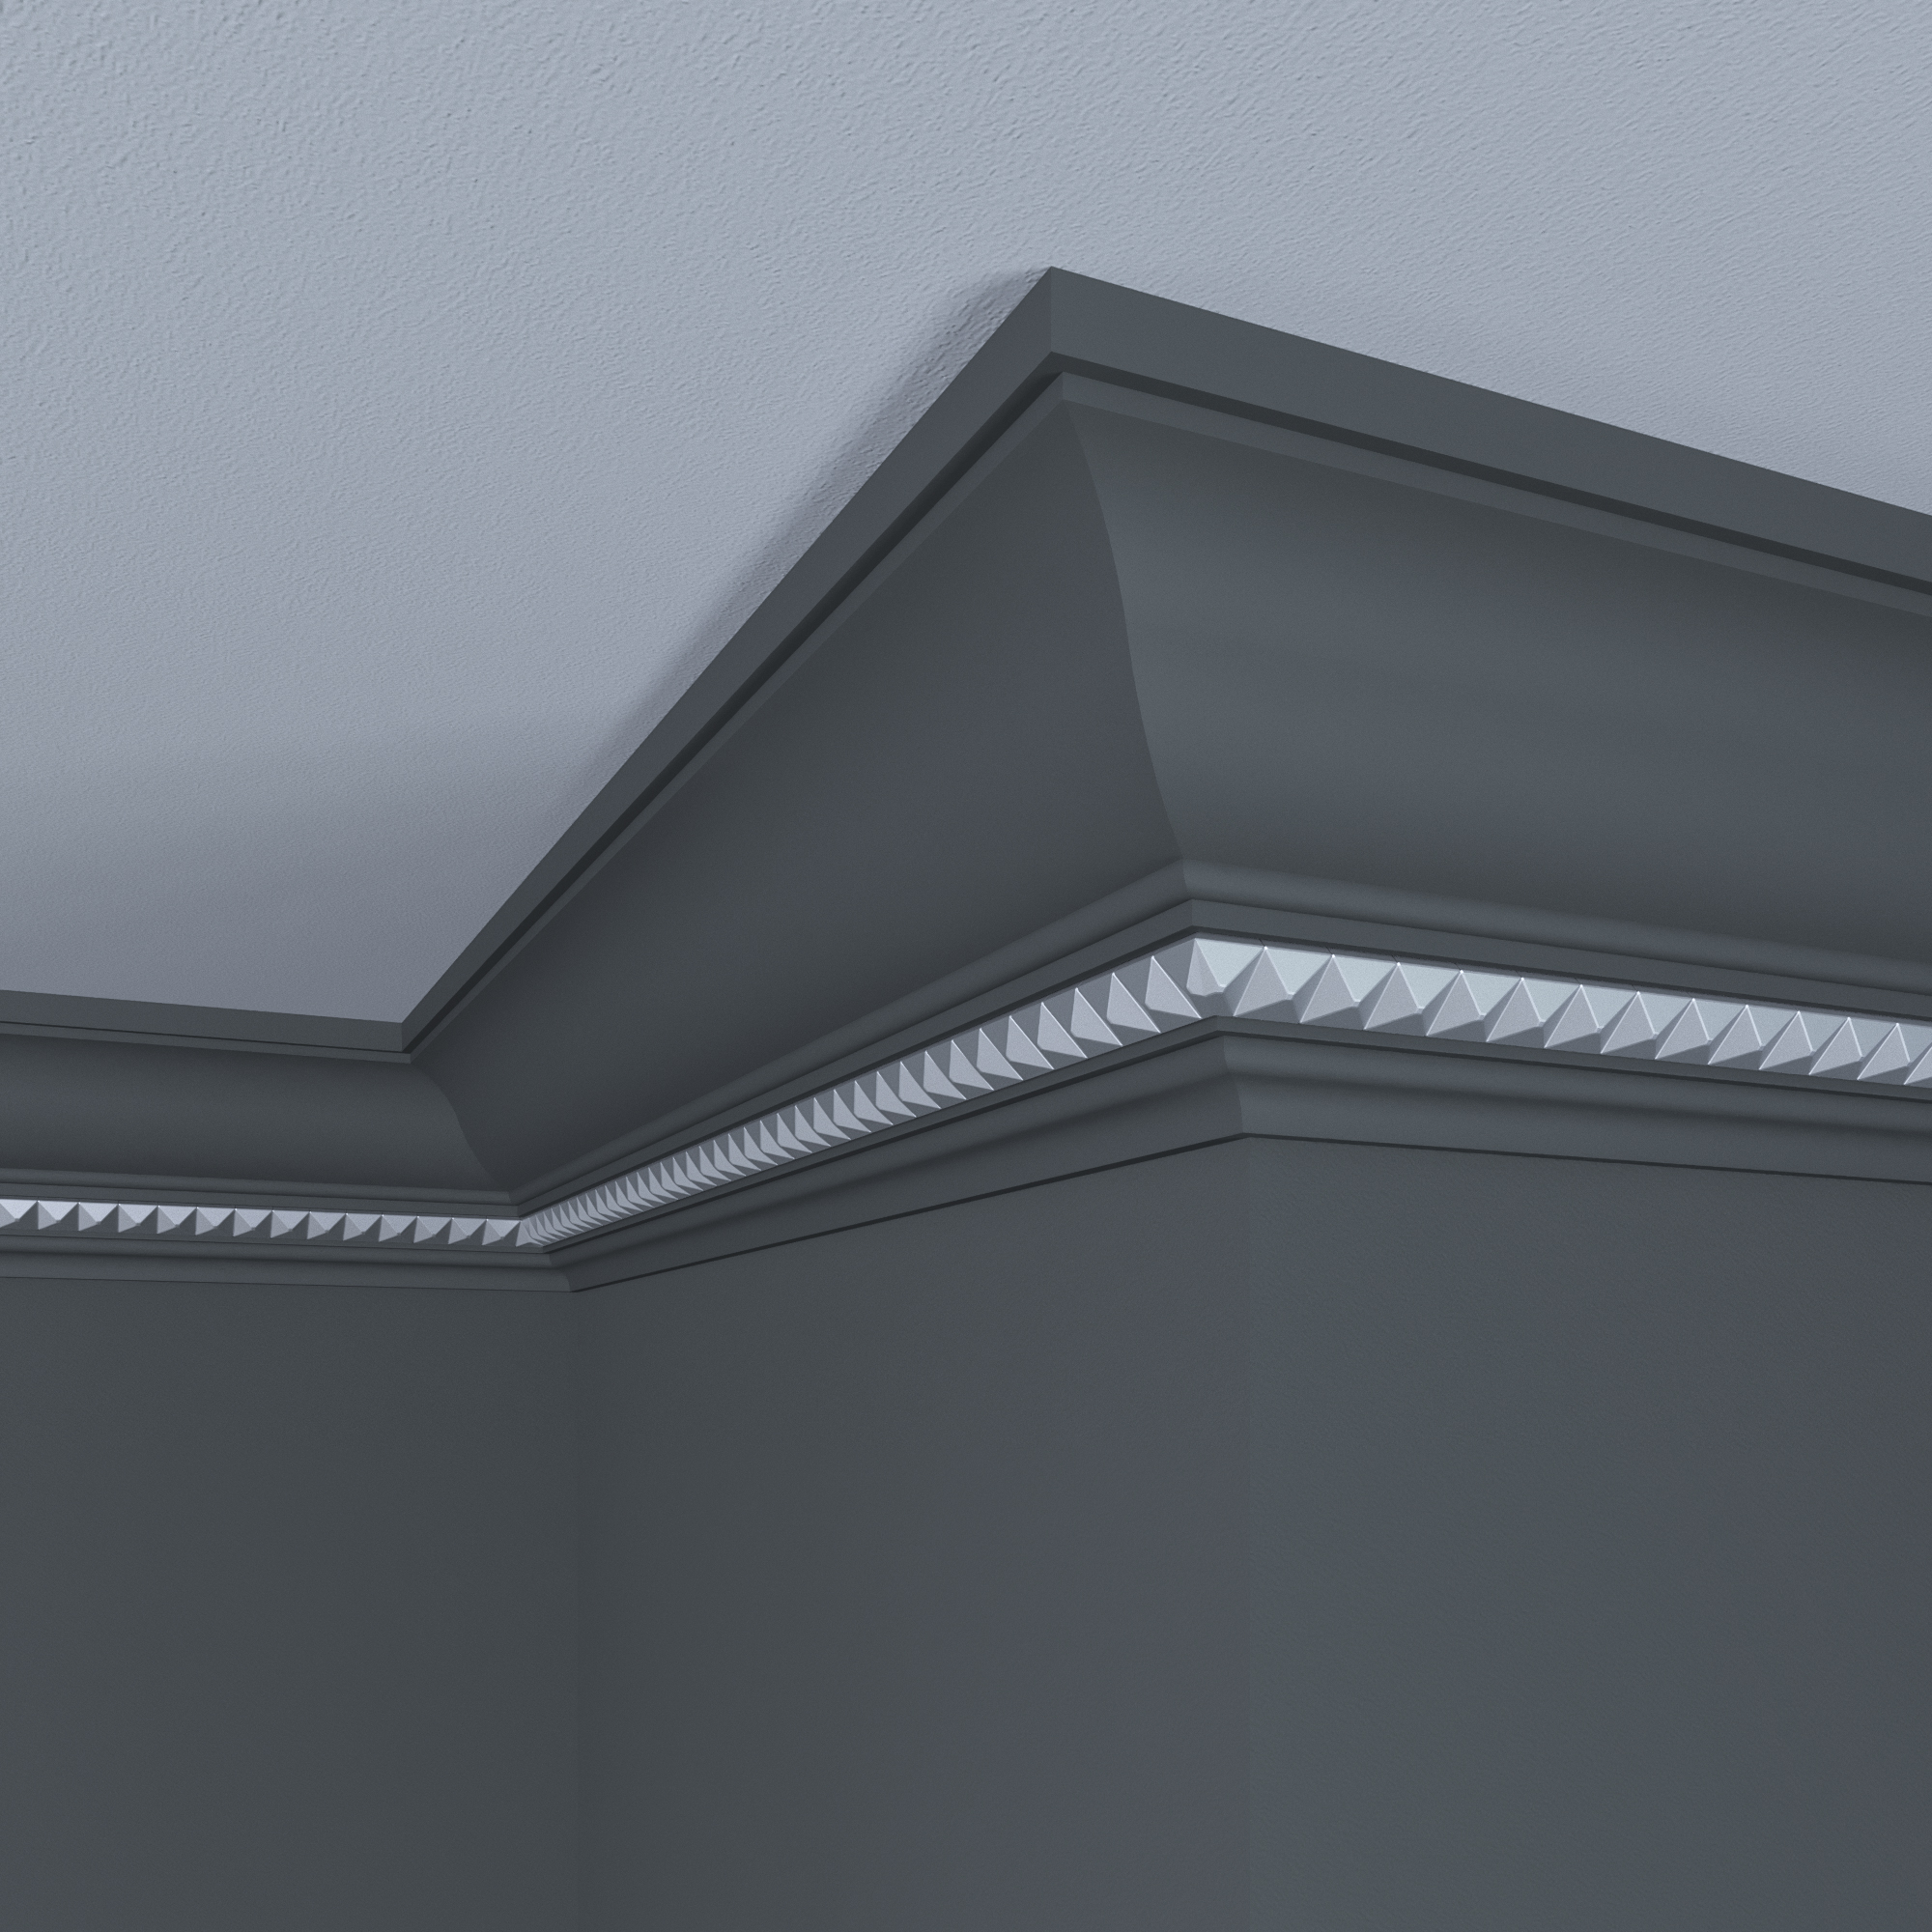 Haute 2-in-1 Moulding: Silver Pyramid on crown moulding.